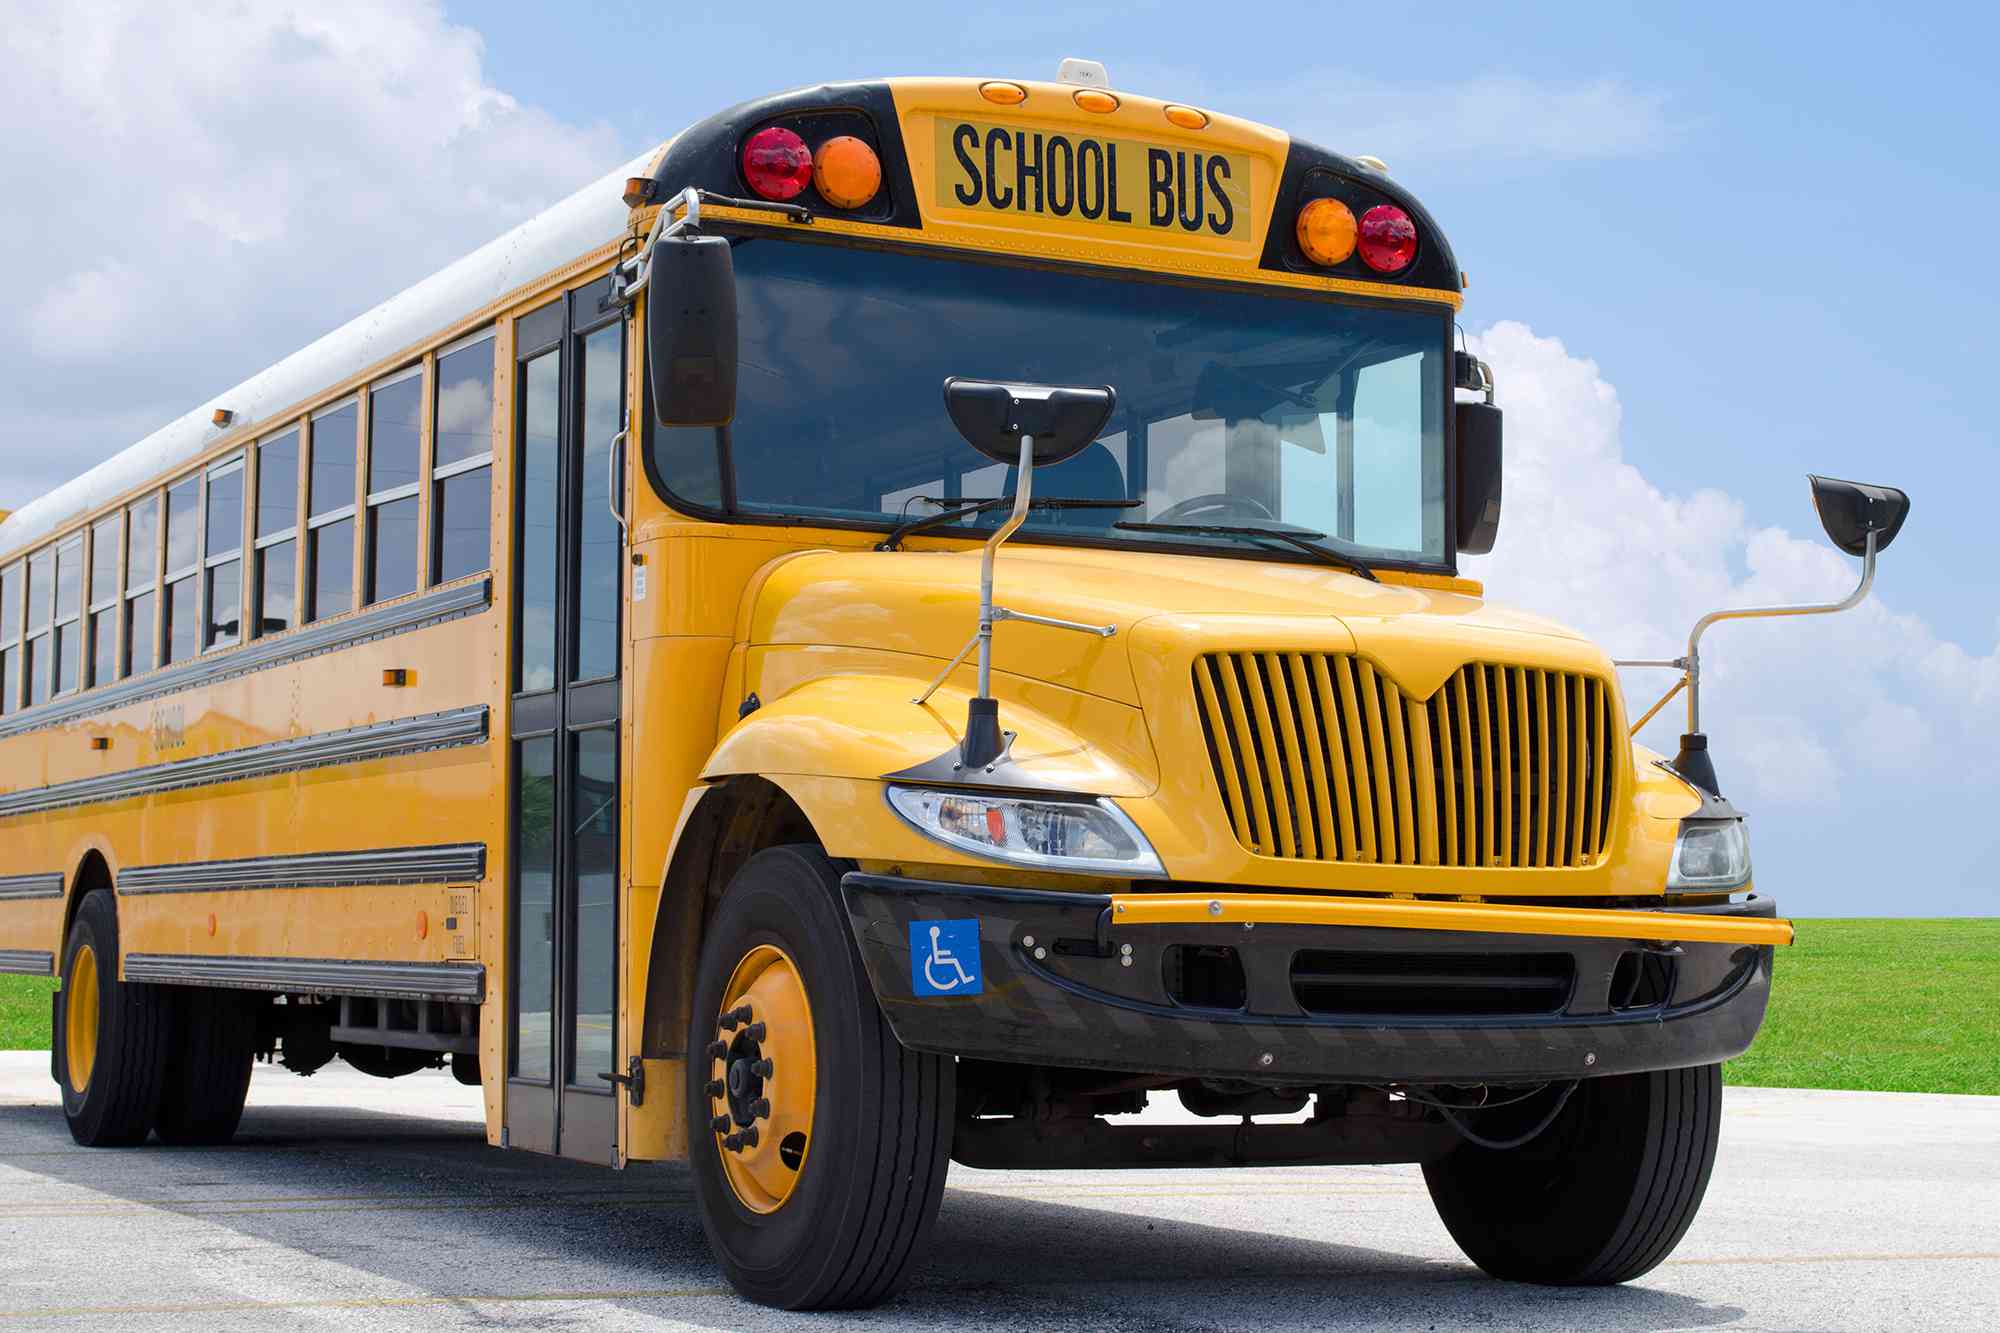 13-Year-Old Girl Allegedly Attacked by Classmate and Their Mother on a School Bus in Texas